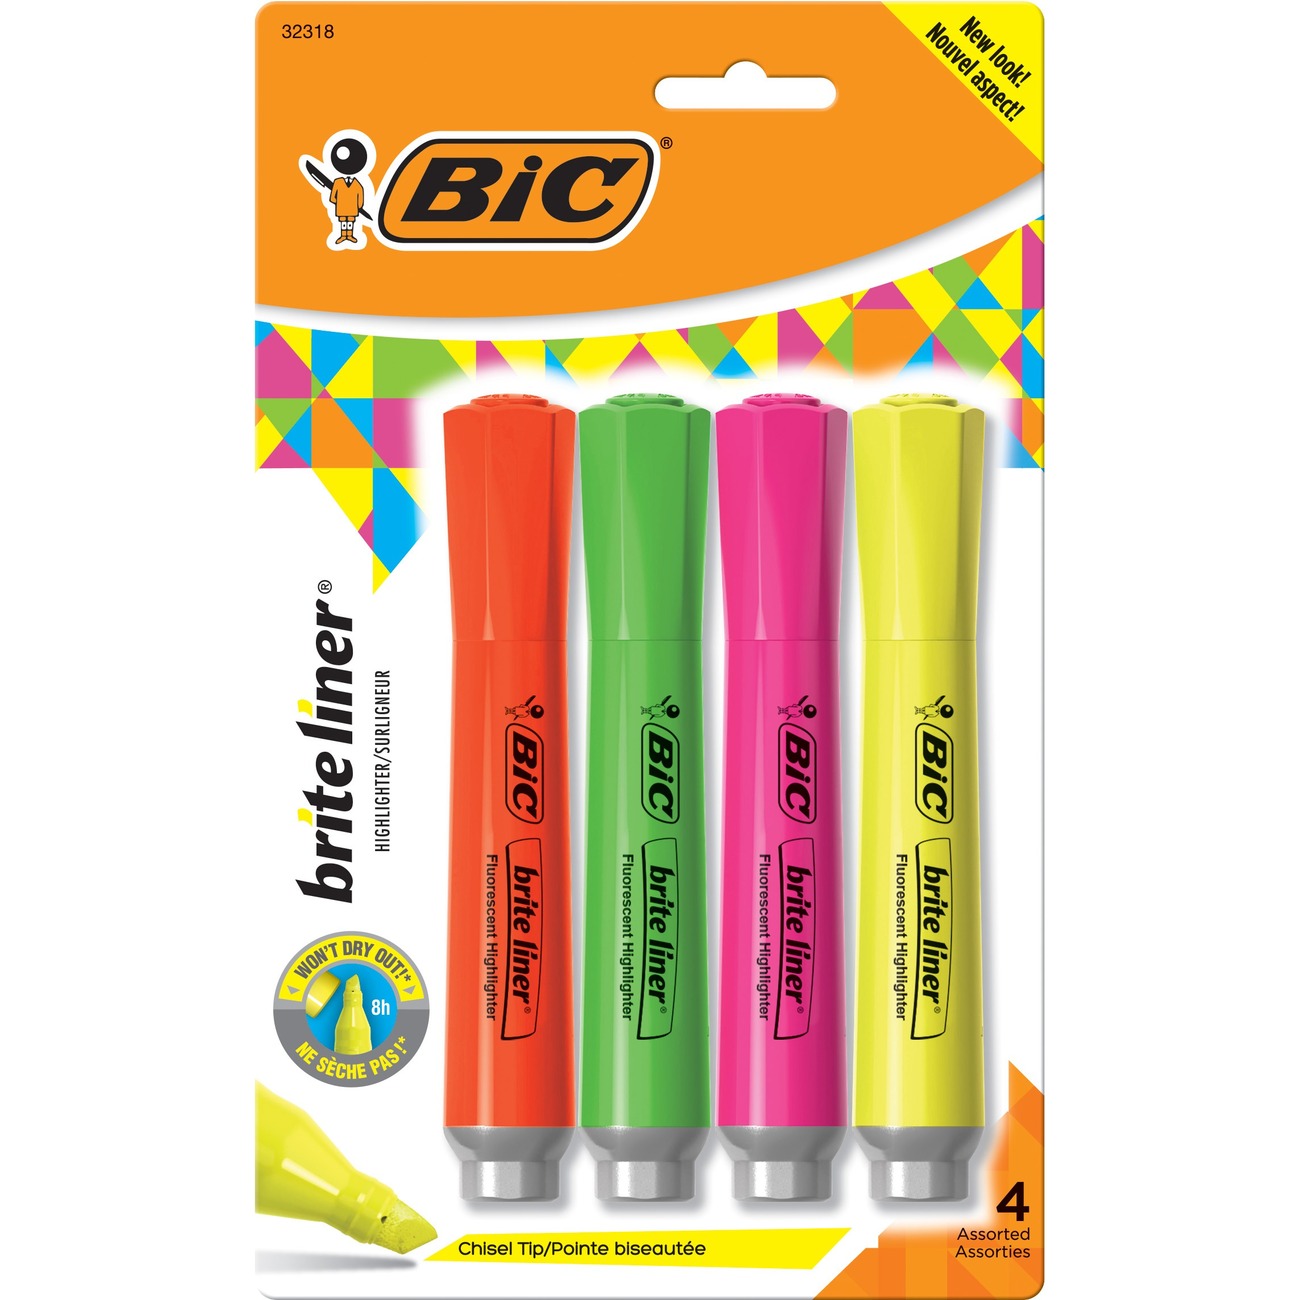 Bic Mark-It Markers and Sharpie Markers Comparison - 2 Old 2 Color